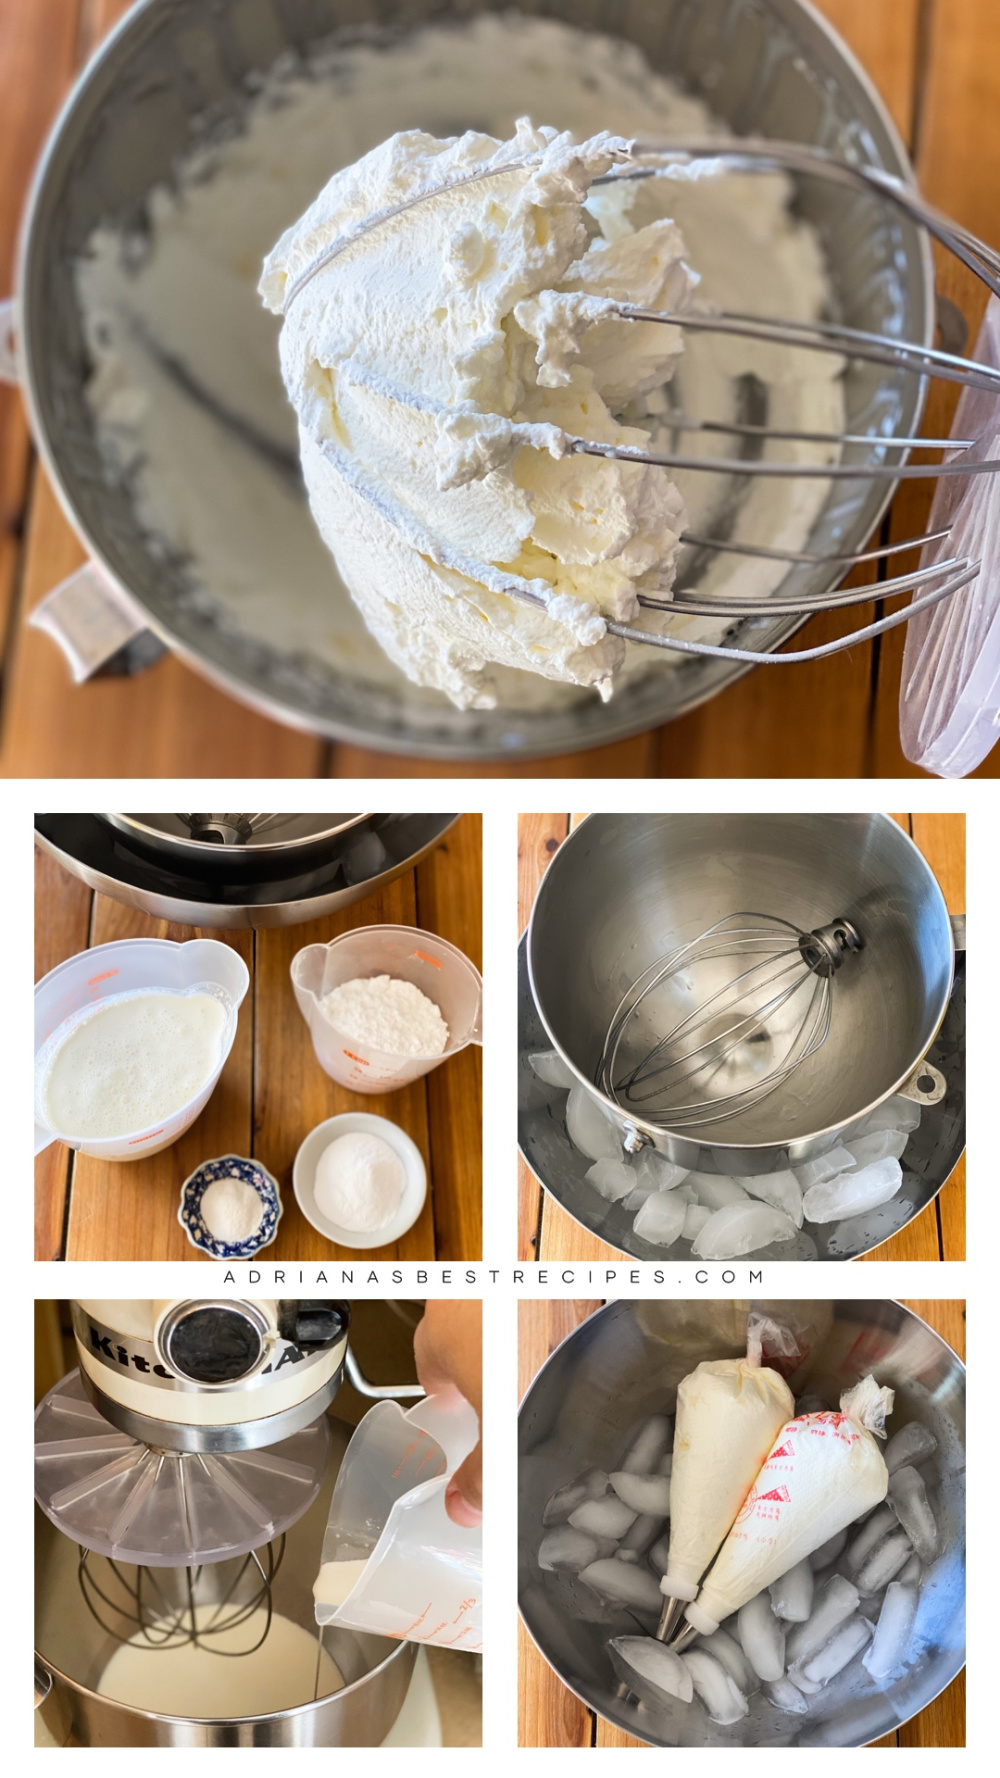 Step by step on how to prepare the whipped cream